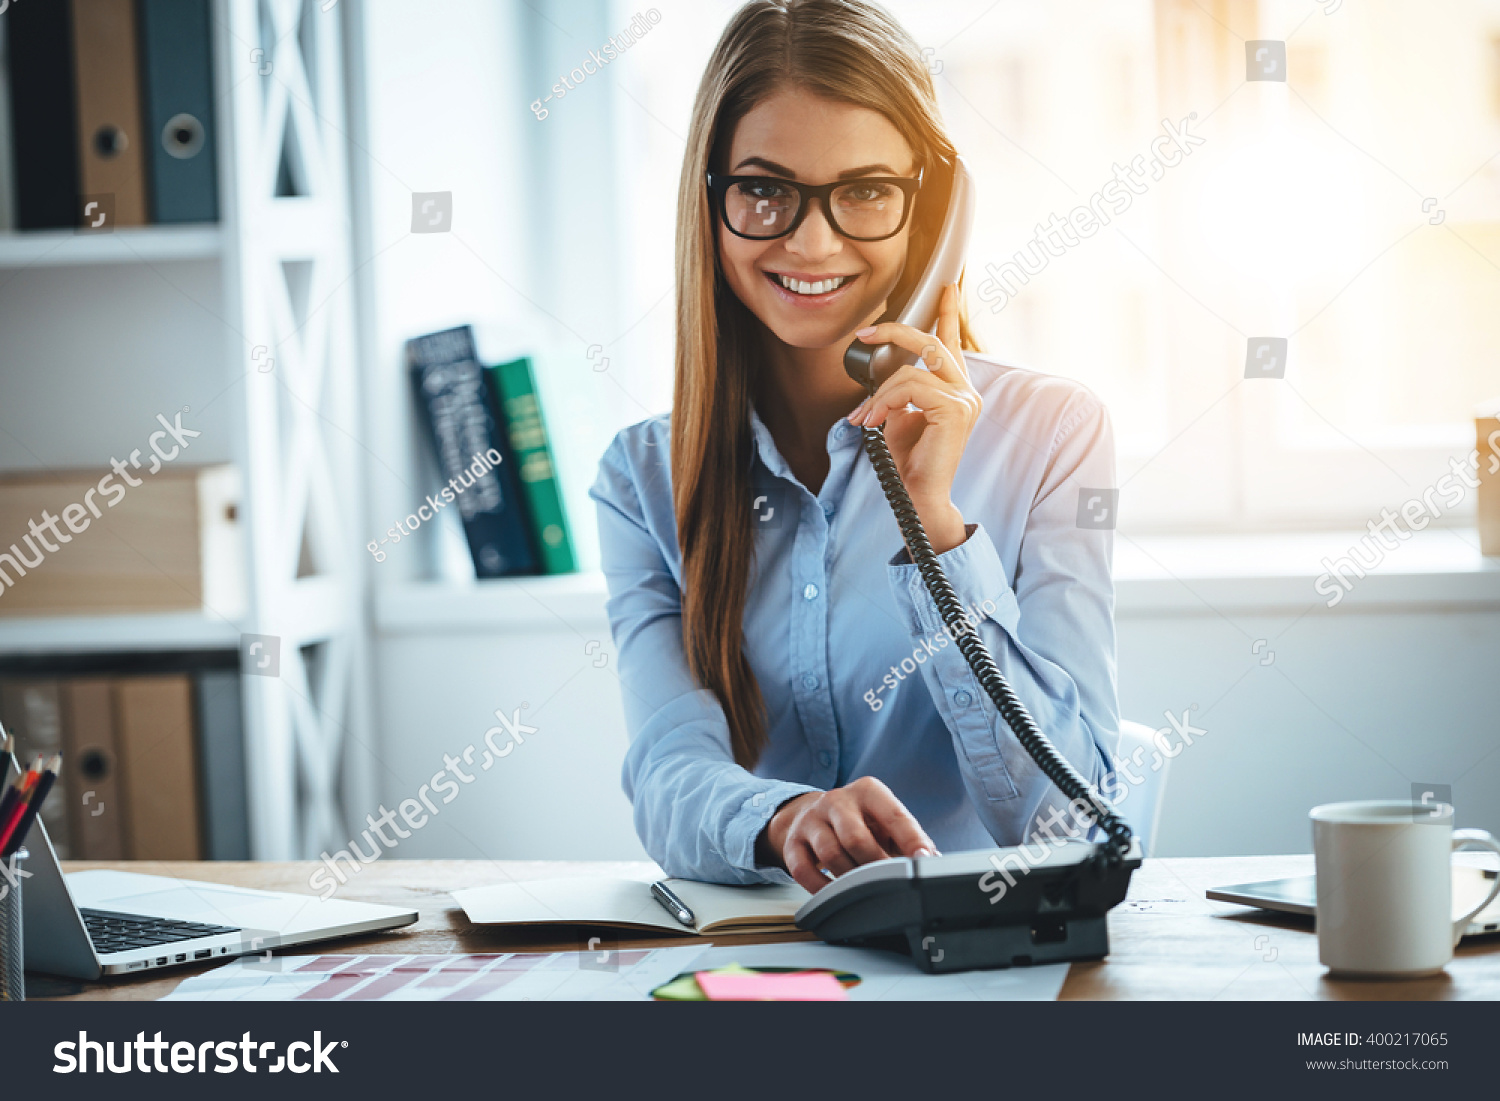 I will connect you in one second! Cheerful young beautiful woman in glasses talking on the phone and looking at camera with smile while sitting at her working place #400217065